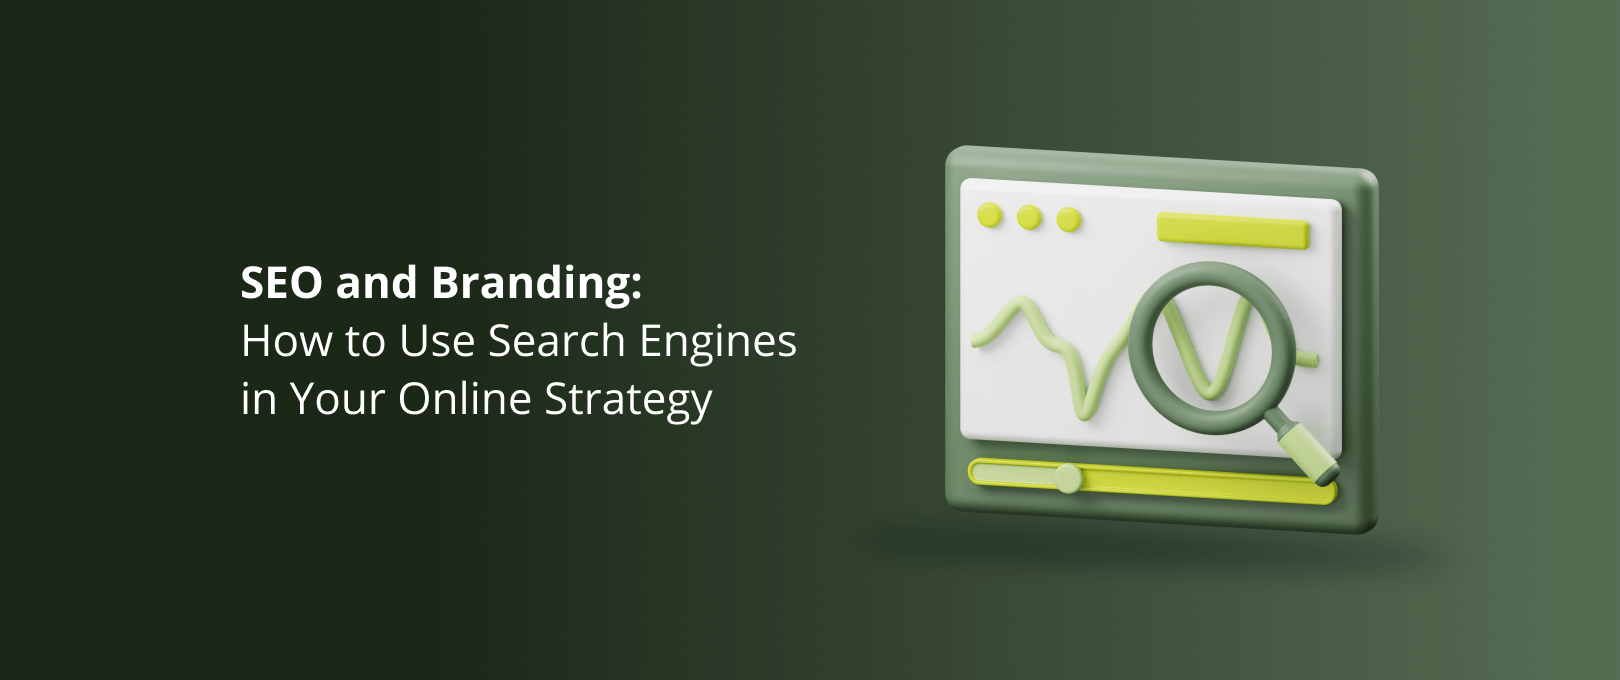 SEO and Branding: How to Use Search Engines in Your Online Strategy - DevriX